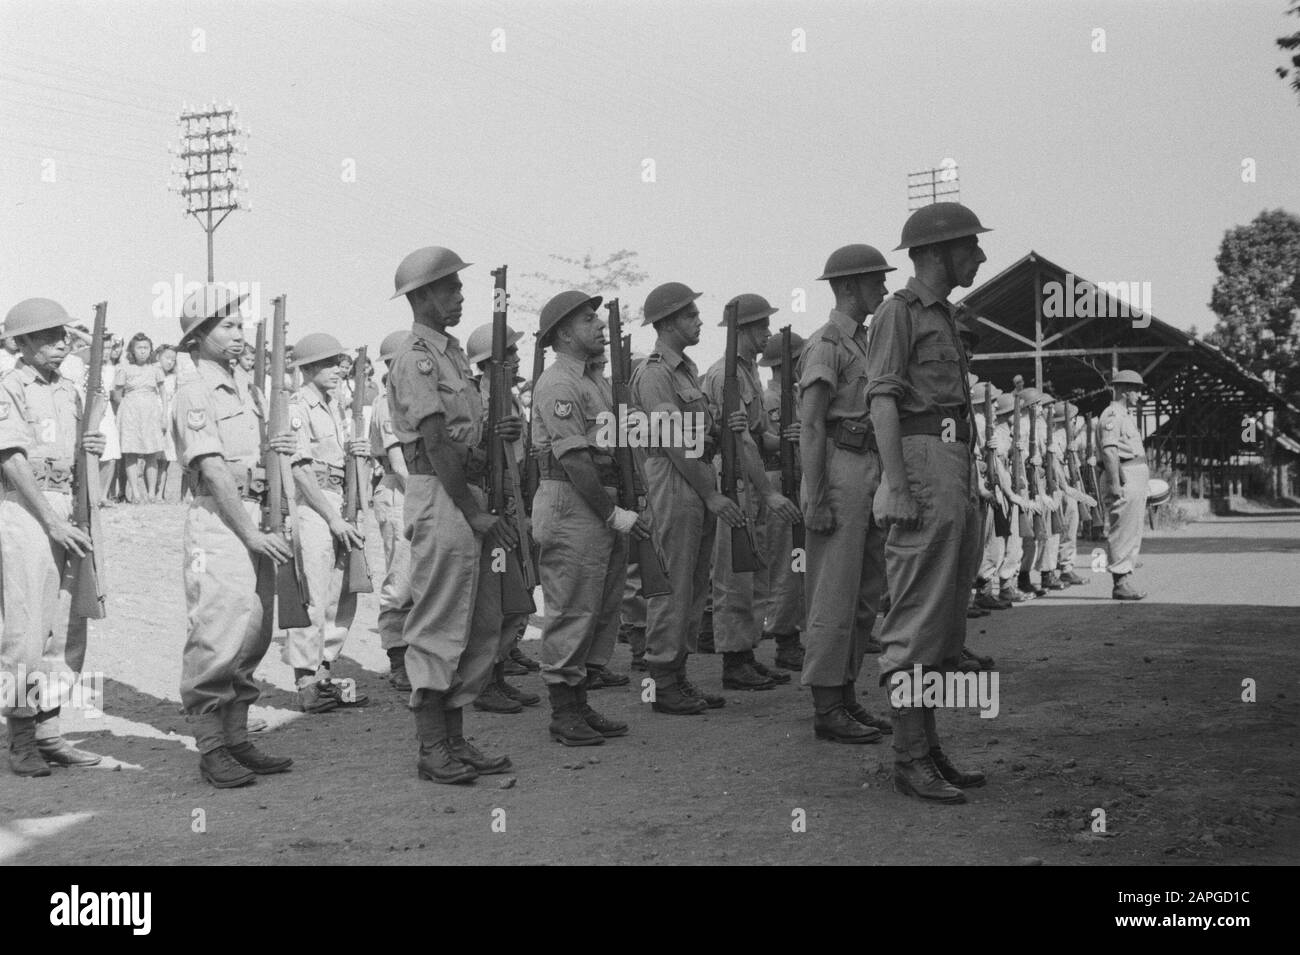 Award Sergeant J. Muller and Corporal M.J.B. Baggerman at Bandoeng Description: Collection Photo Collection Service for Army Contacts Indonesia, photon number 265-1-3 Date: July 1947 Location: Bandung, Indonesia, Dutch East Indies Stock Photo